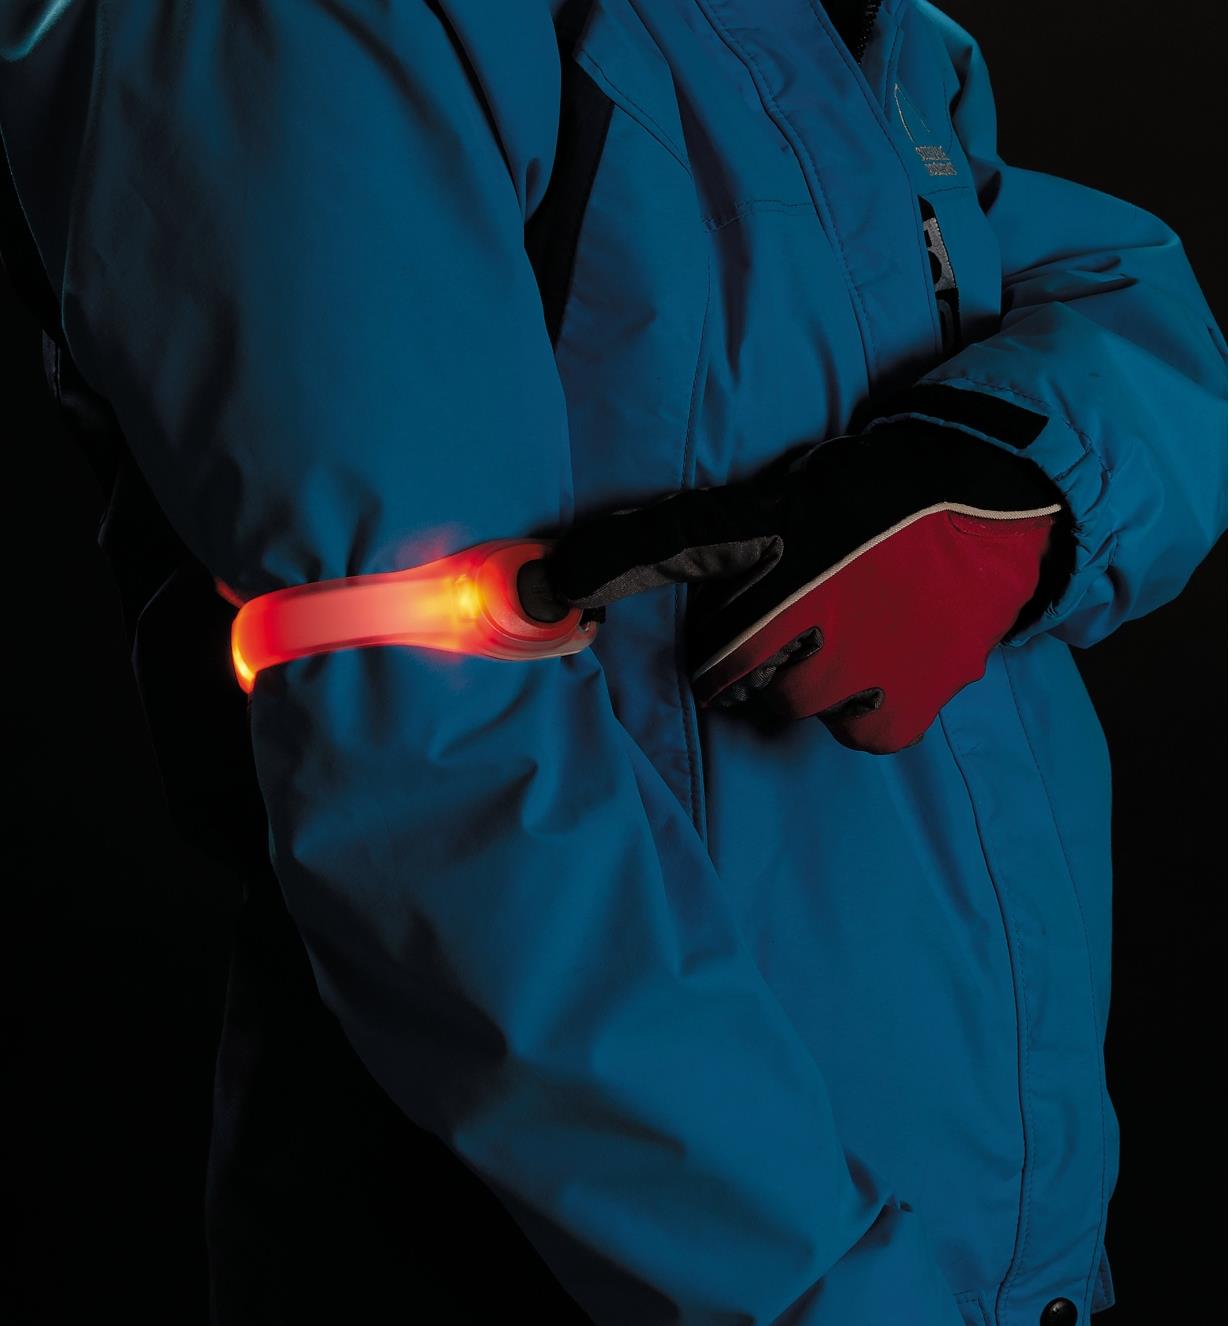 A person wearing the Red Wrap Light on their arm, pressing the button